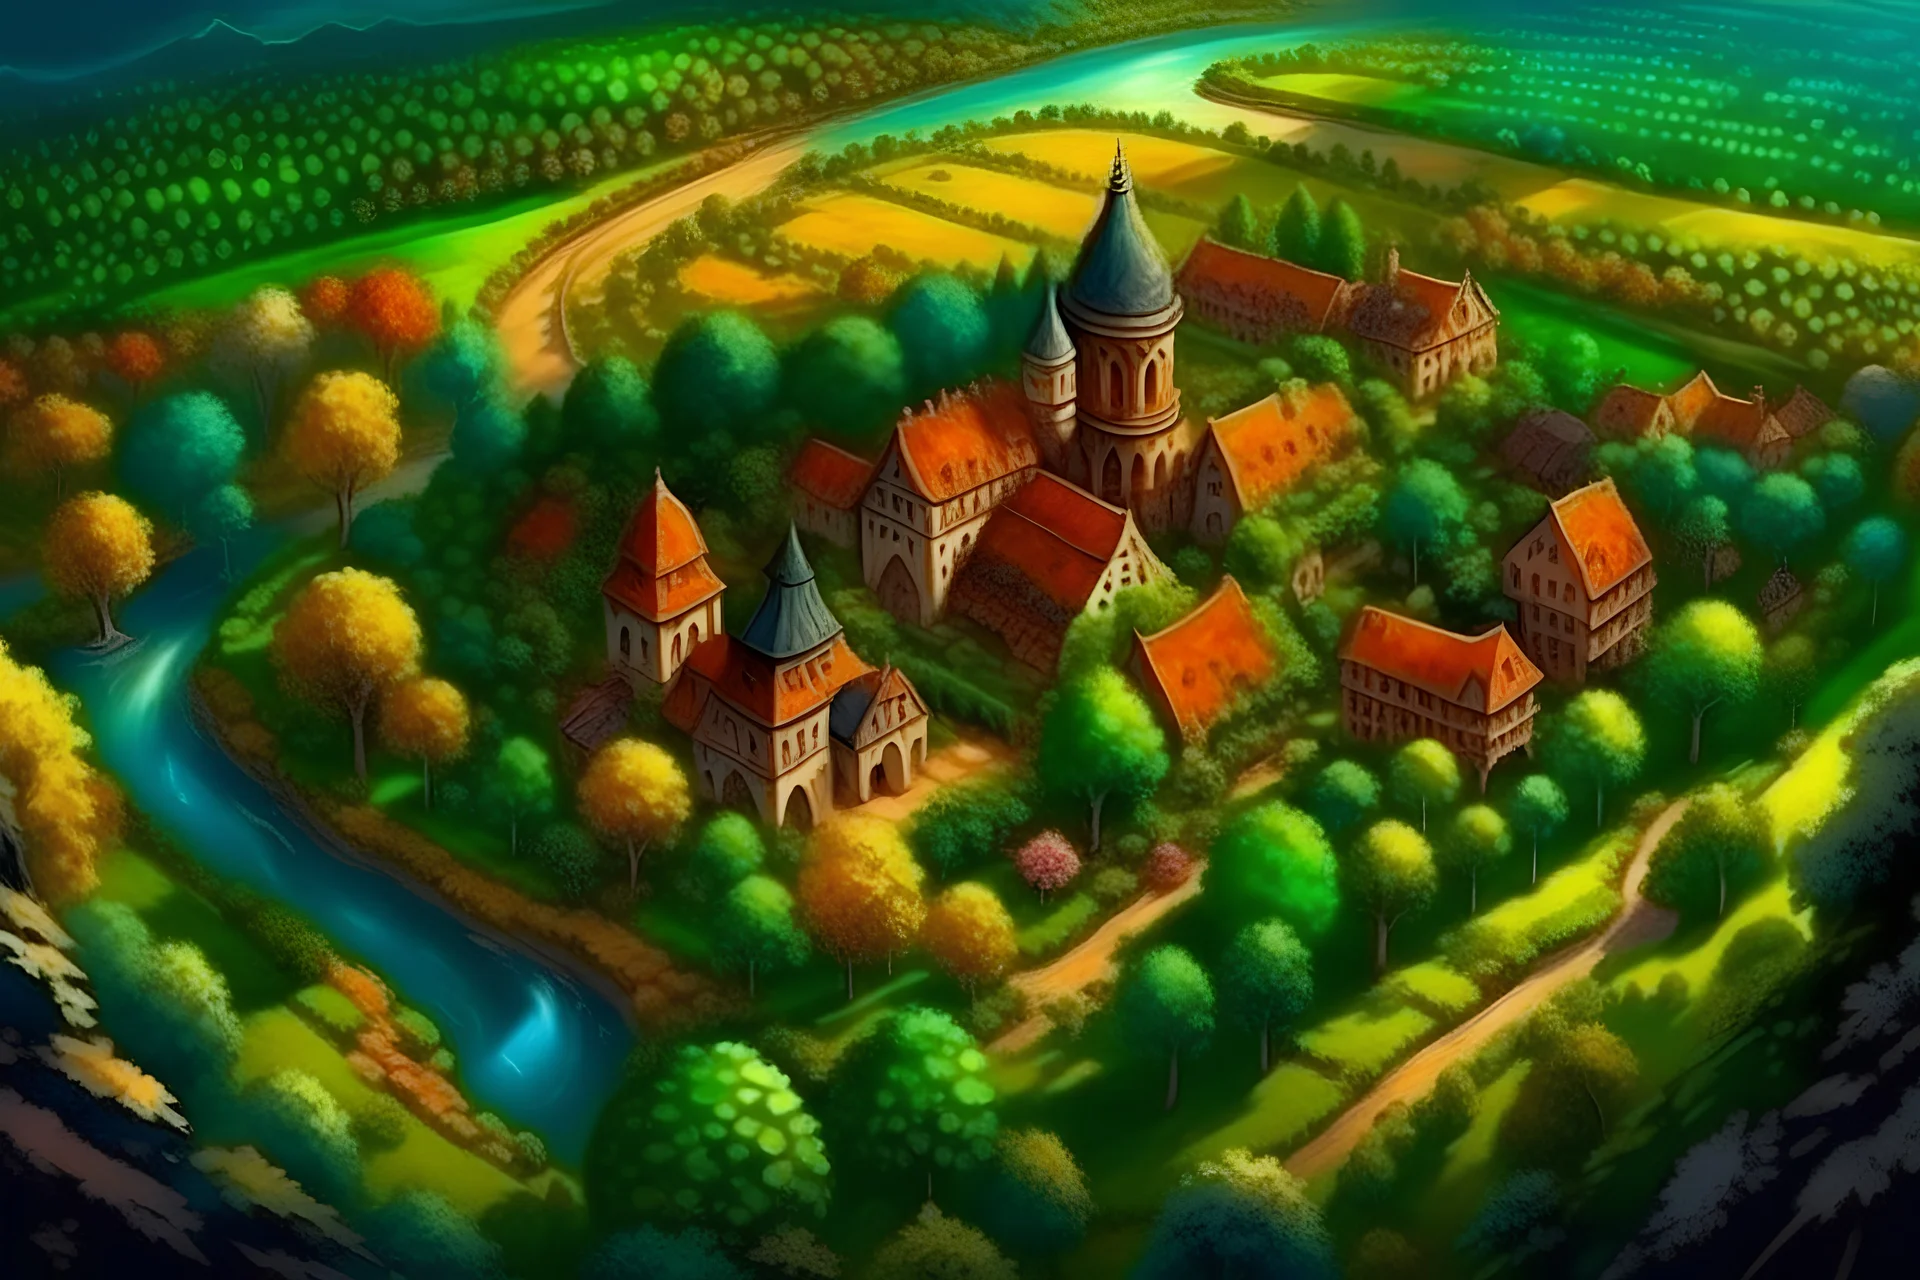 Village surrounded by forest, river through middle, church nearby, birds eye view, fantasy style, photo realistic